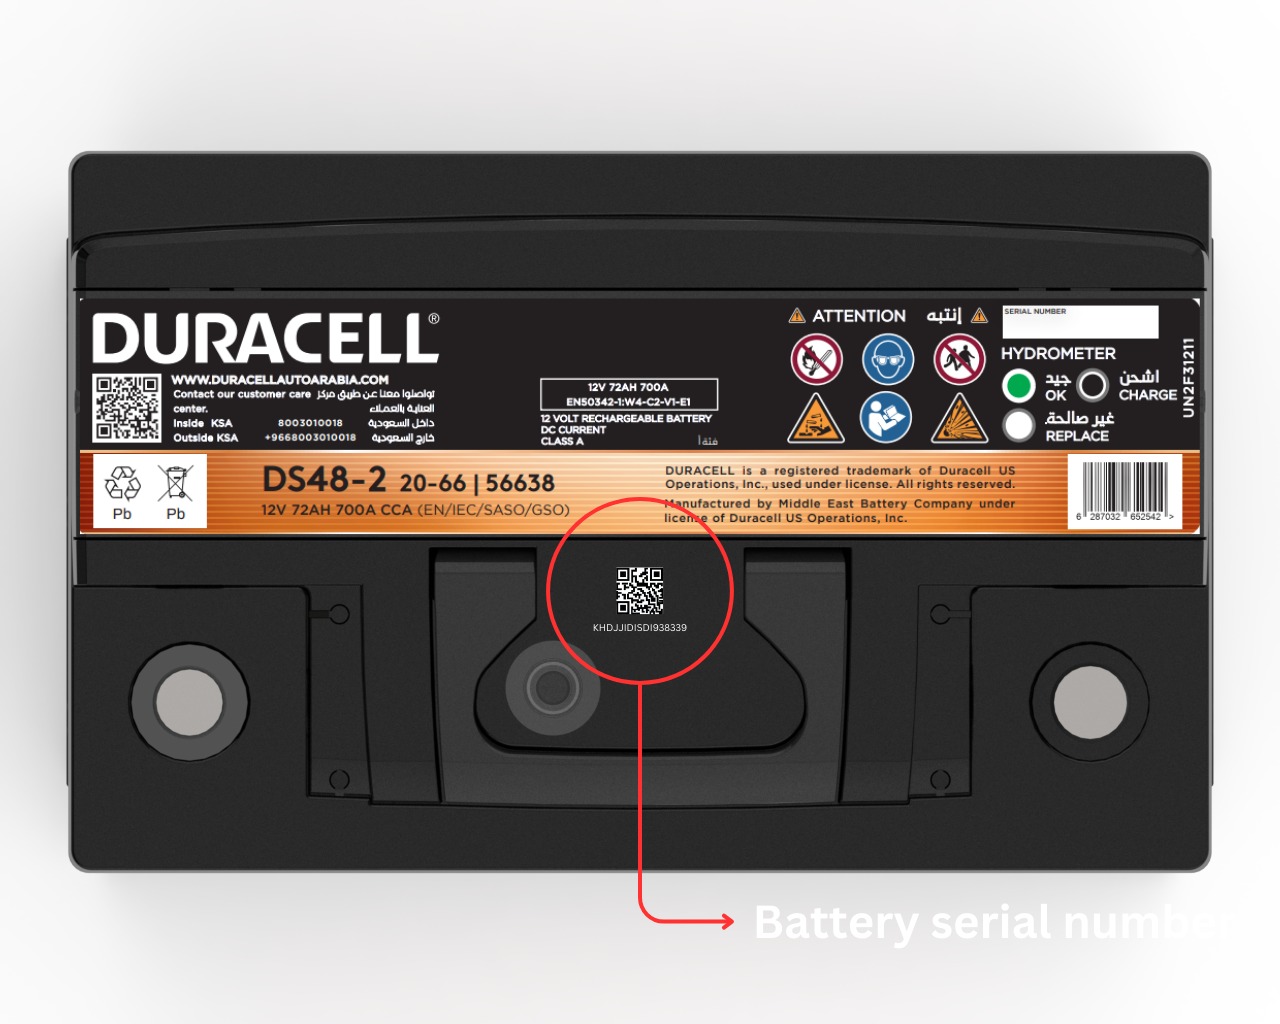 Duracell serial Number